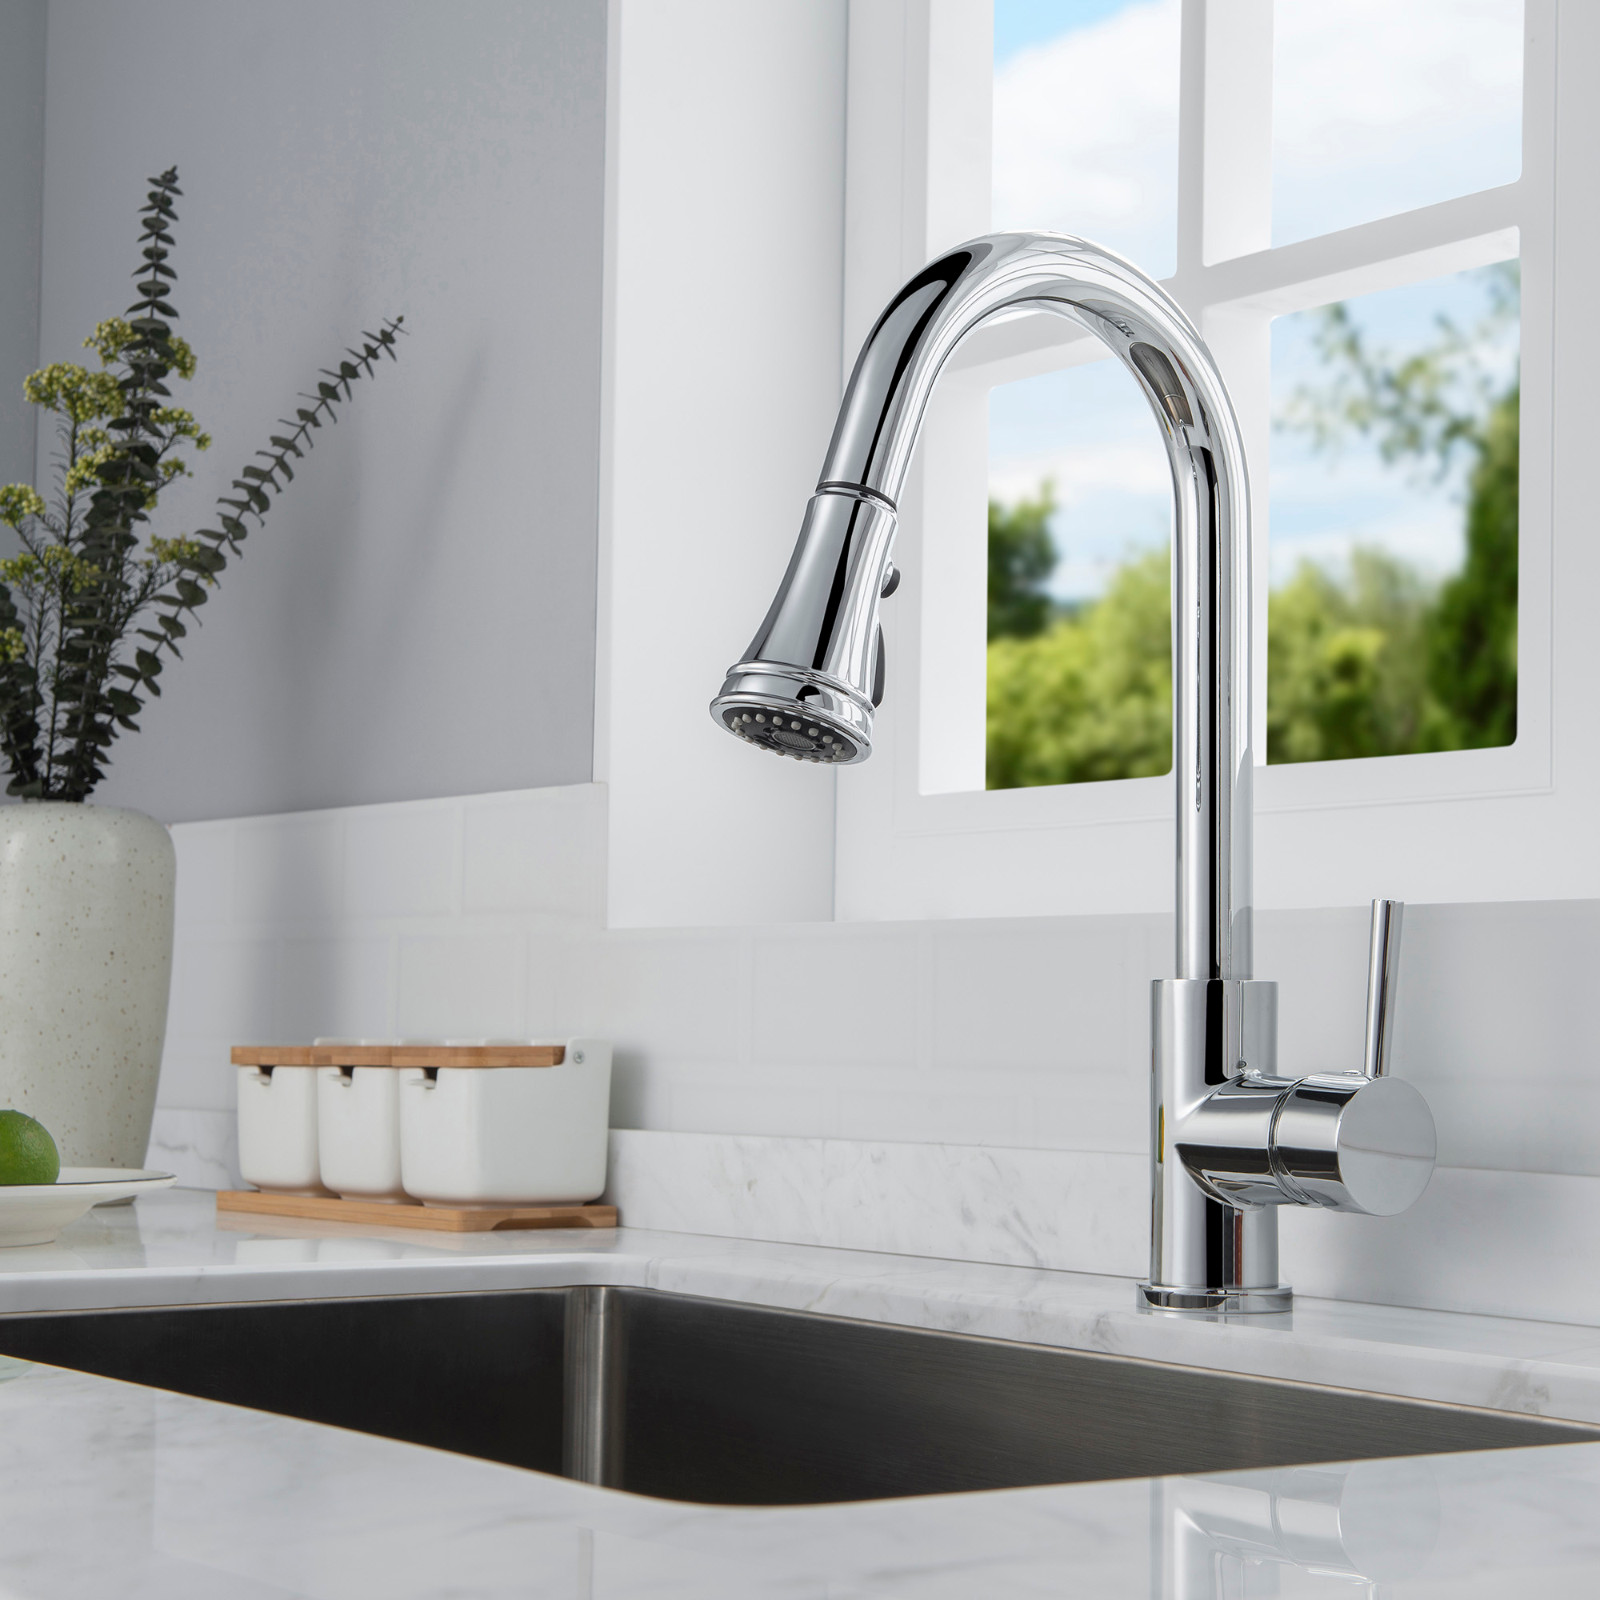  WOODBRIDGE WK090801CH Stainless Steel Single Handle Pull Down Kitchen Faucet in Chrome Finish._9400